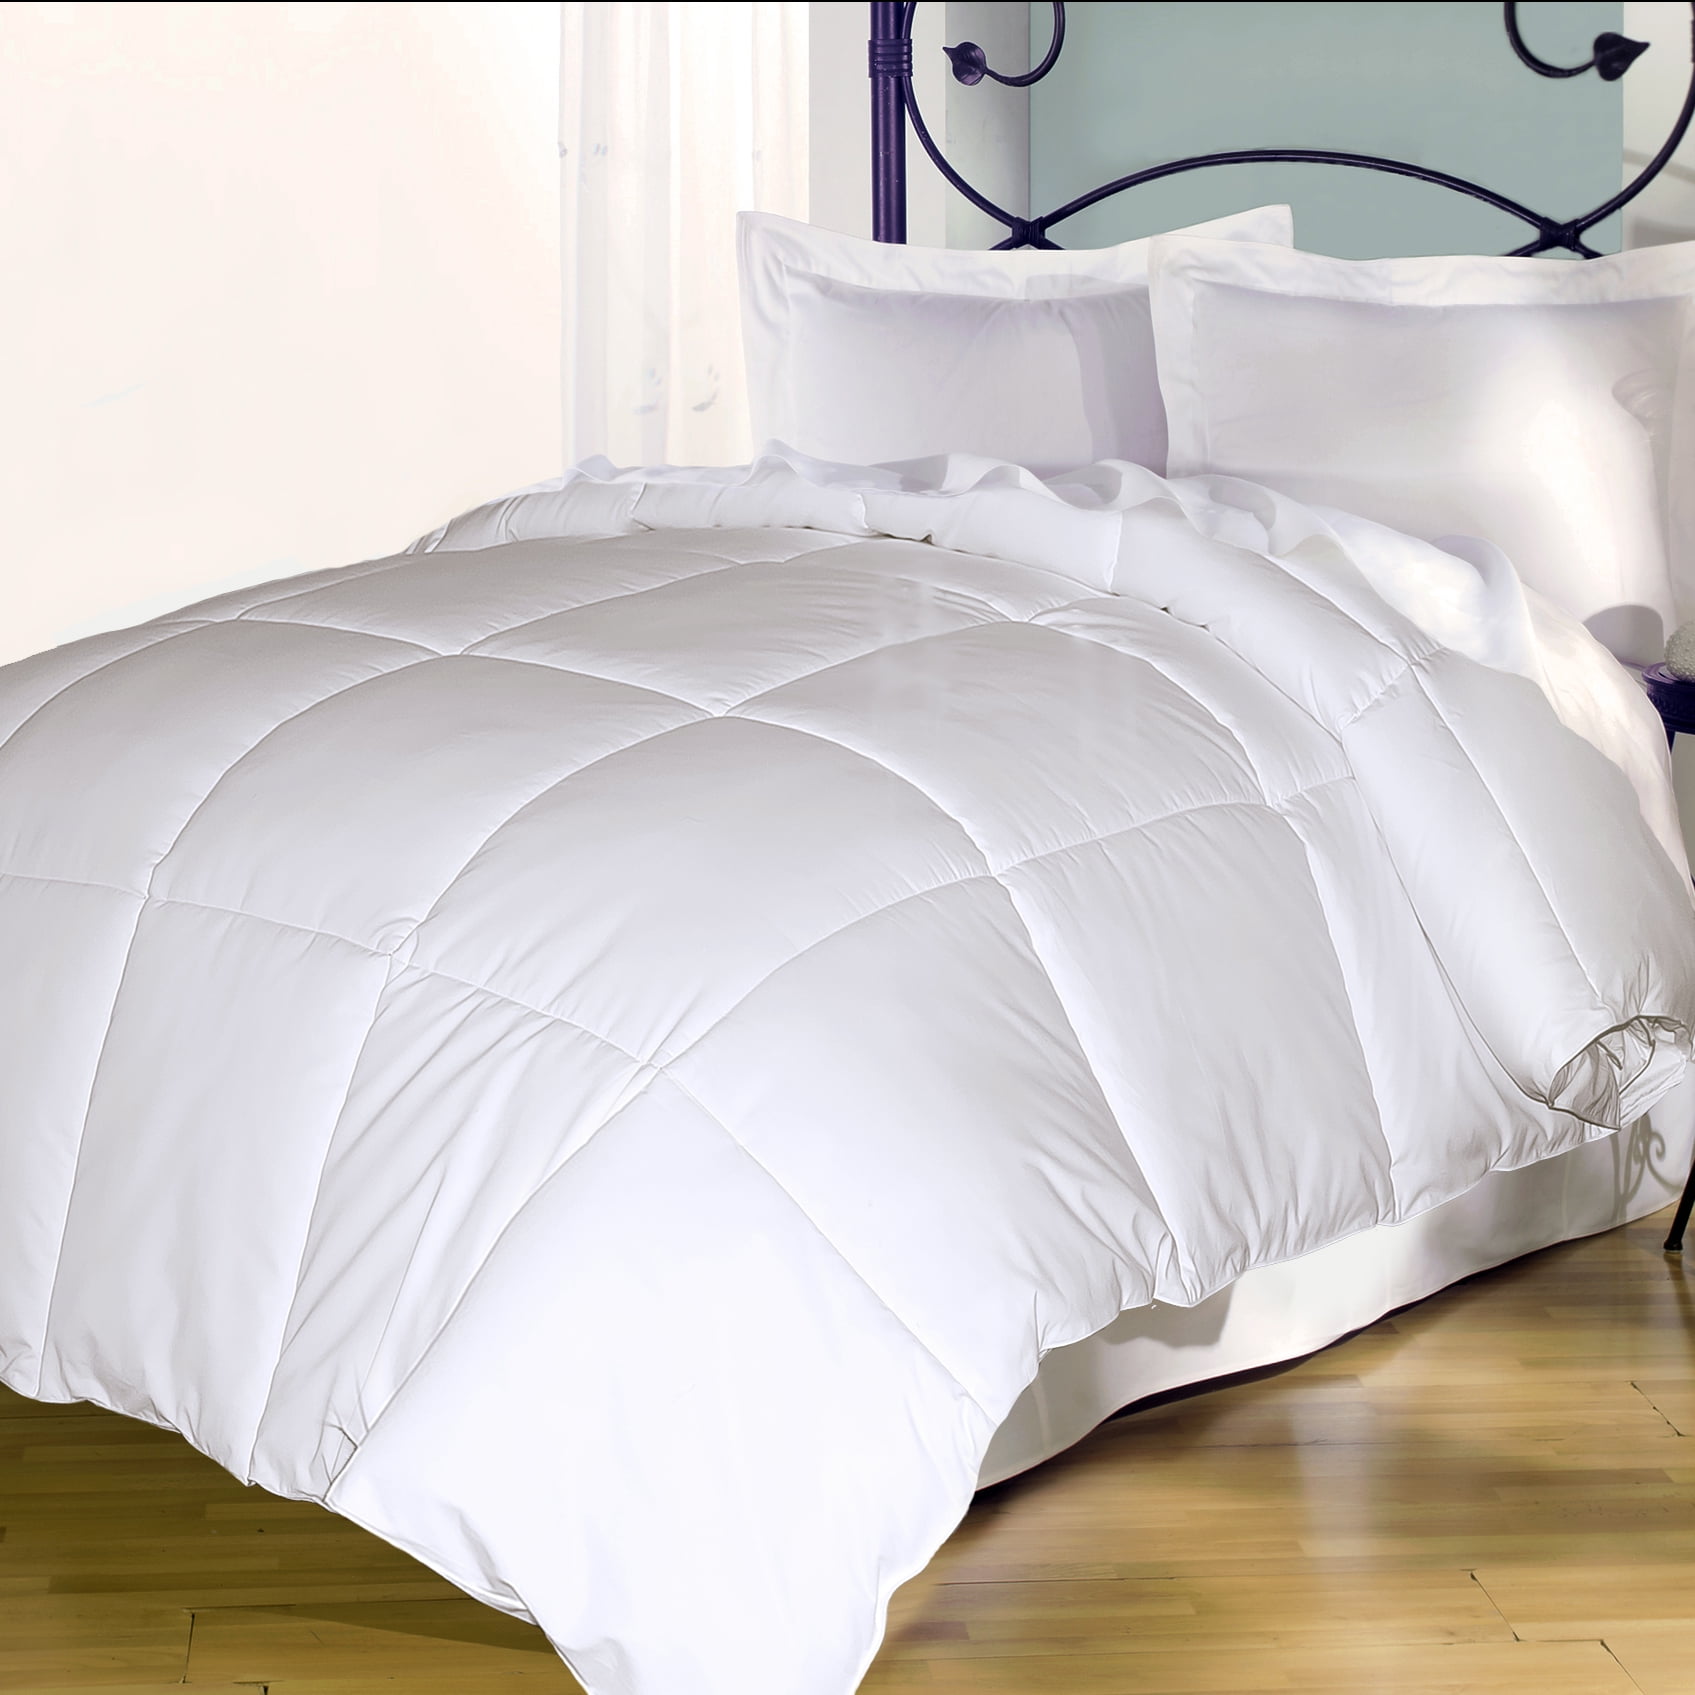 royal luxe white goose feather king comforter